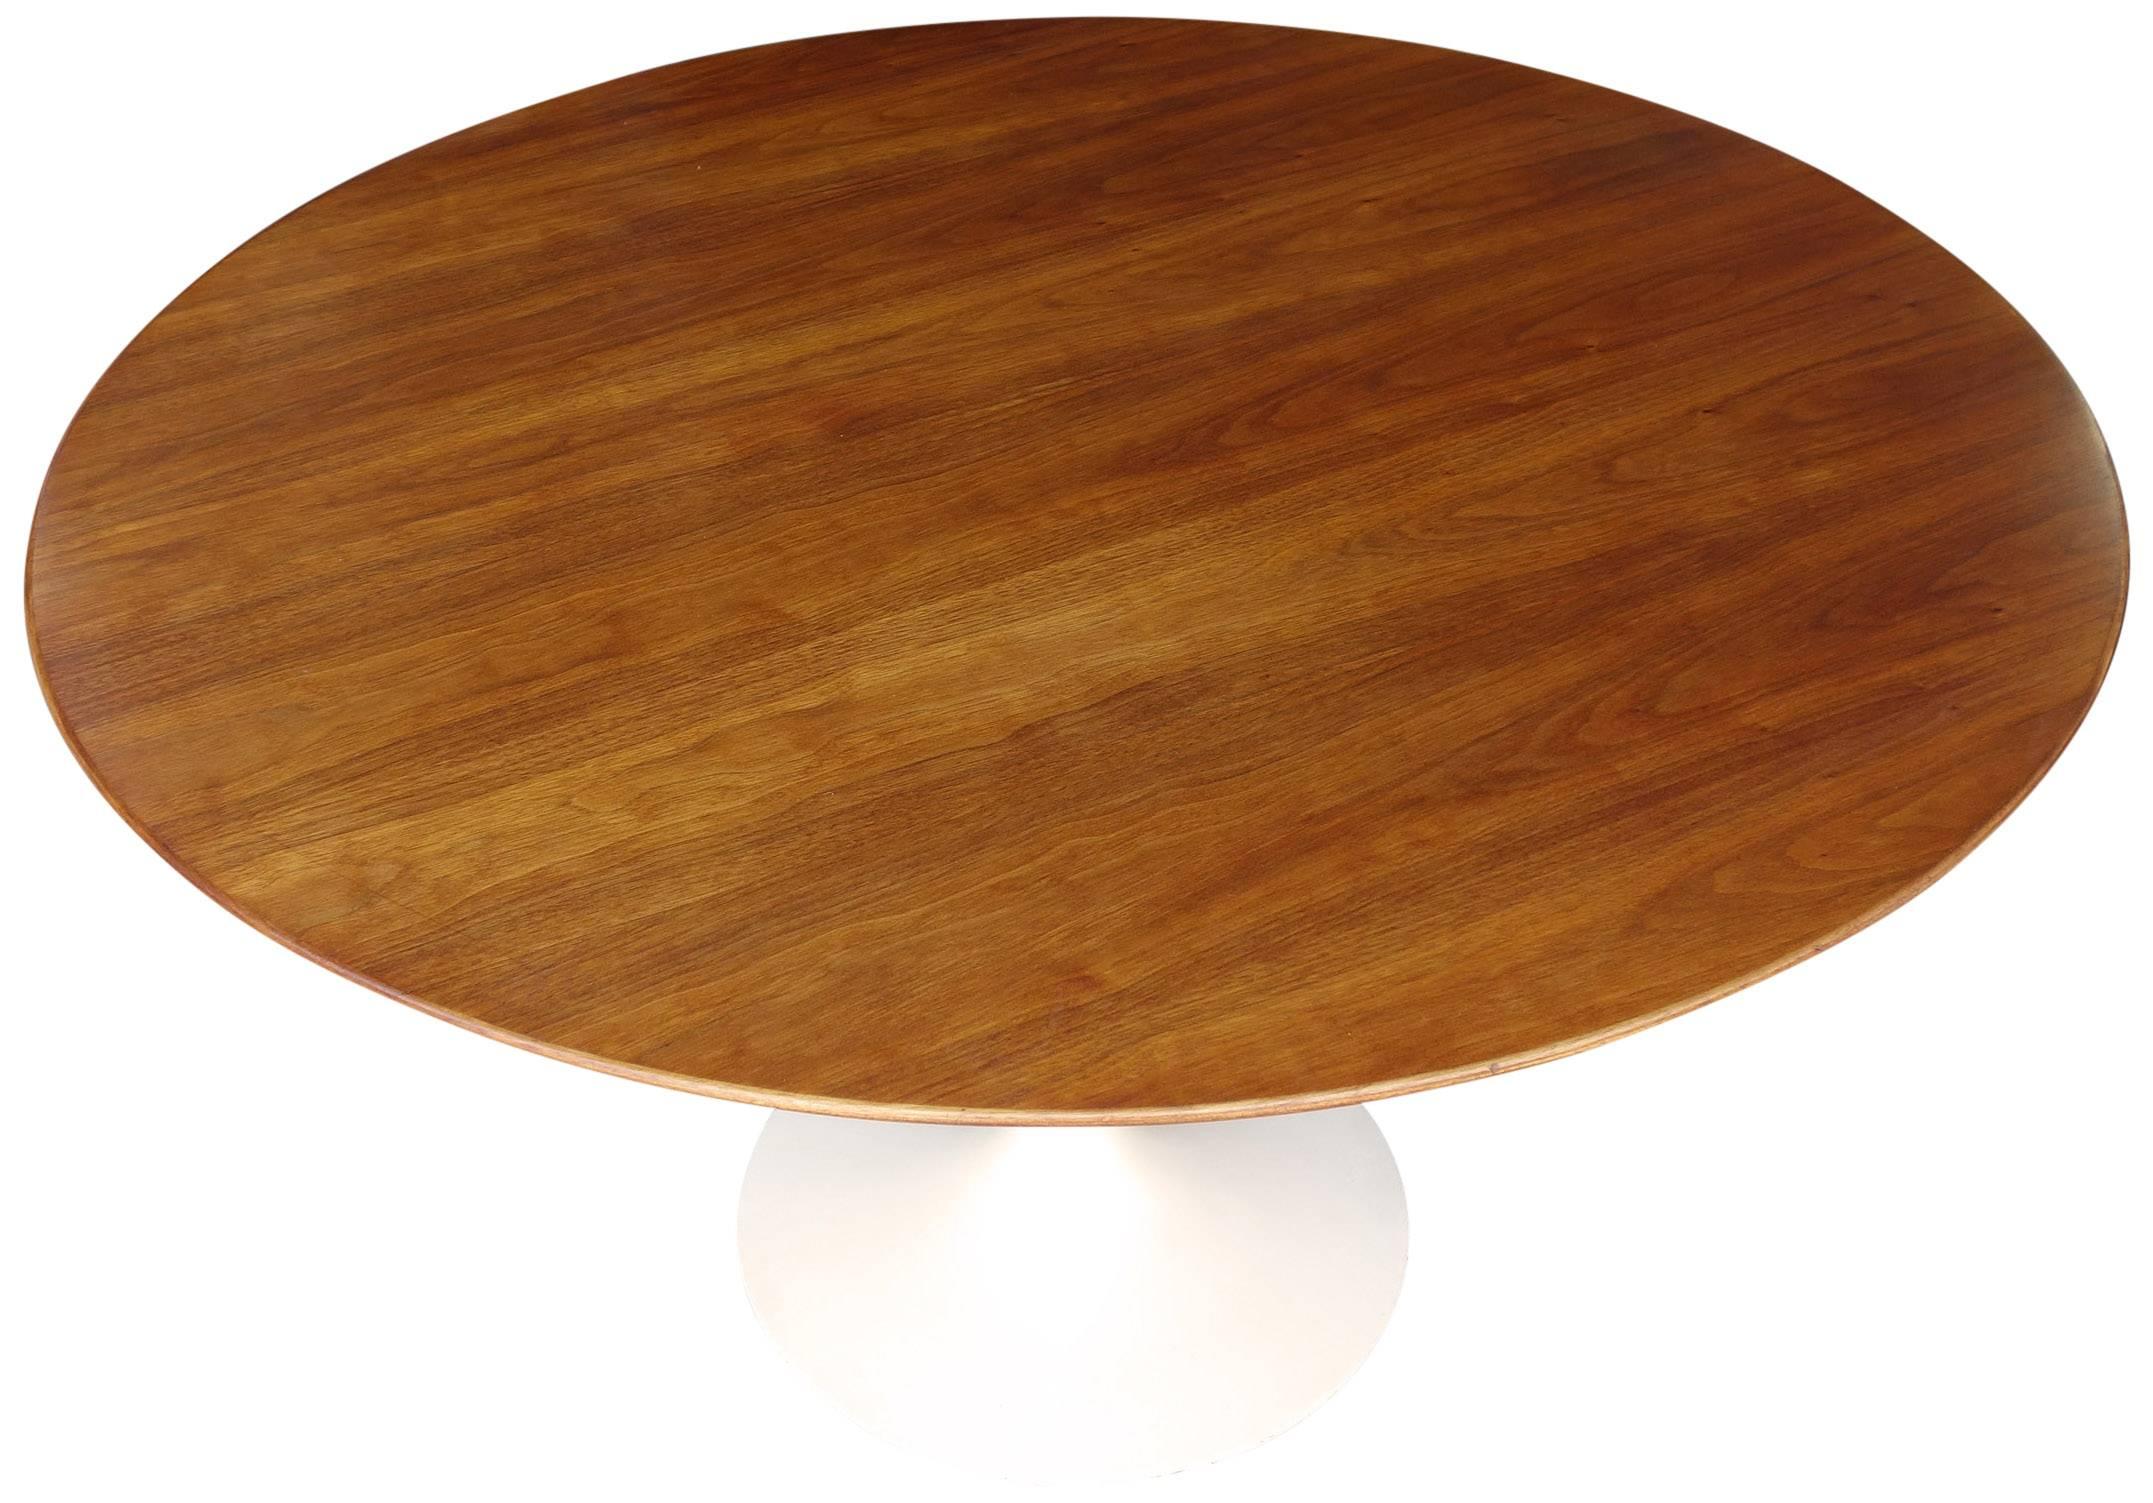 Eero Saarinen for Knoll in walnut on heavy metal base. Wonderful vintage condition. This iconic table was designed by one of the most celebrated artist of that period.